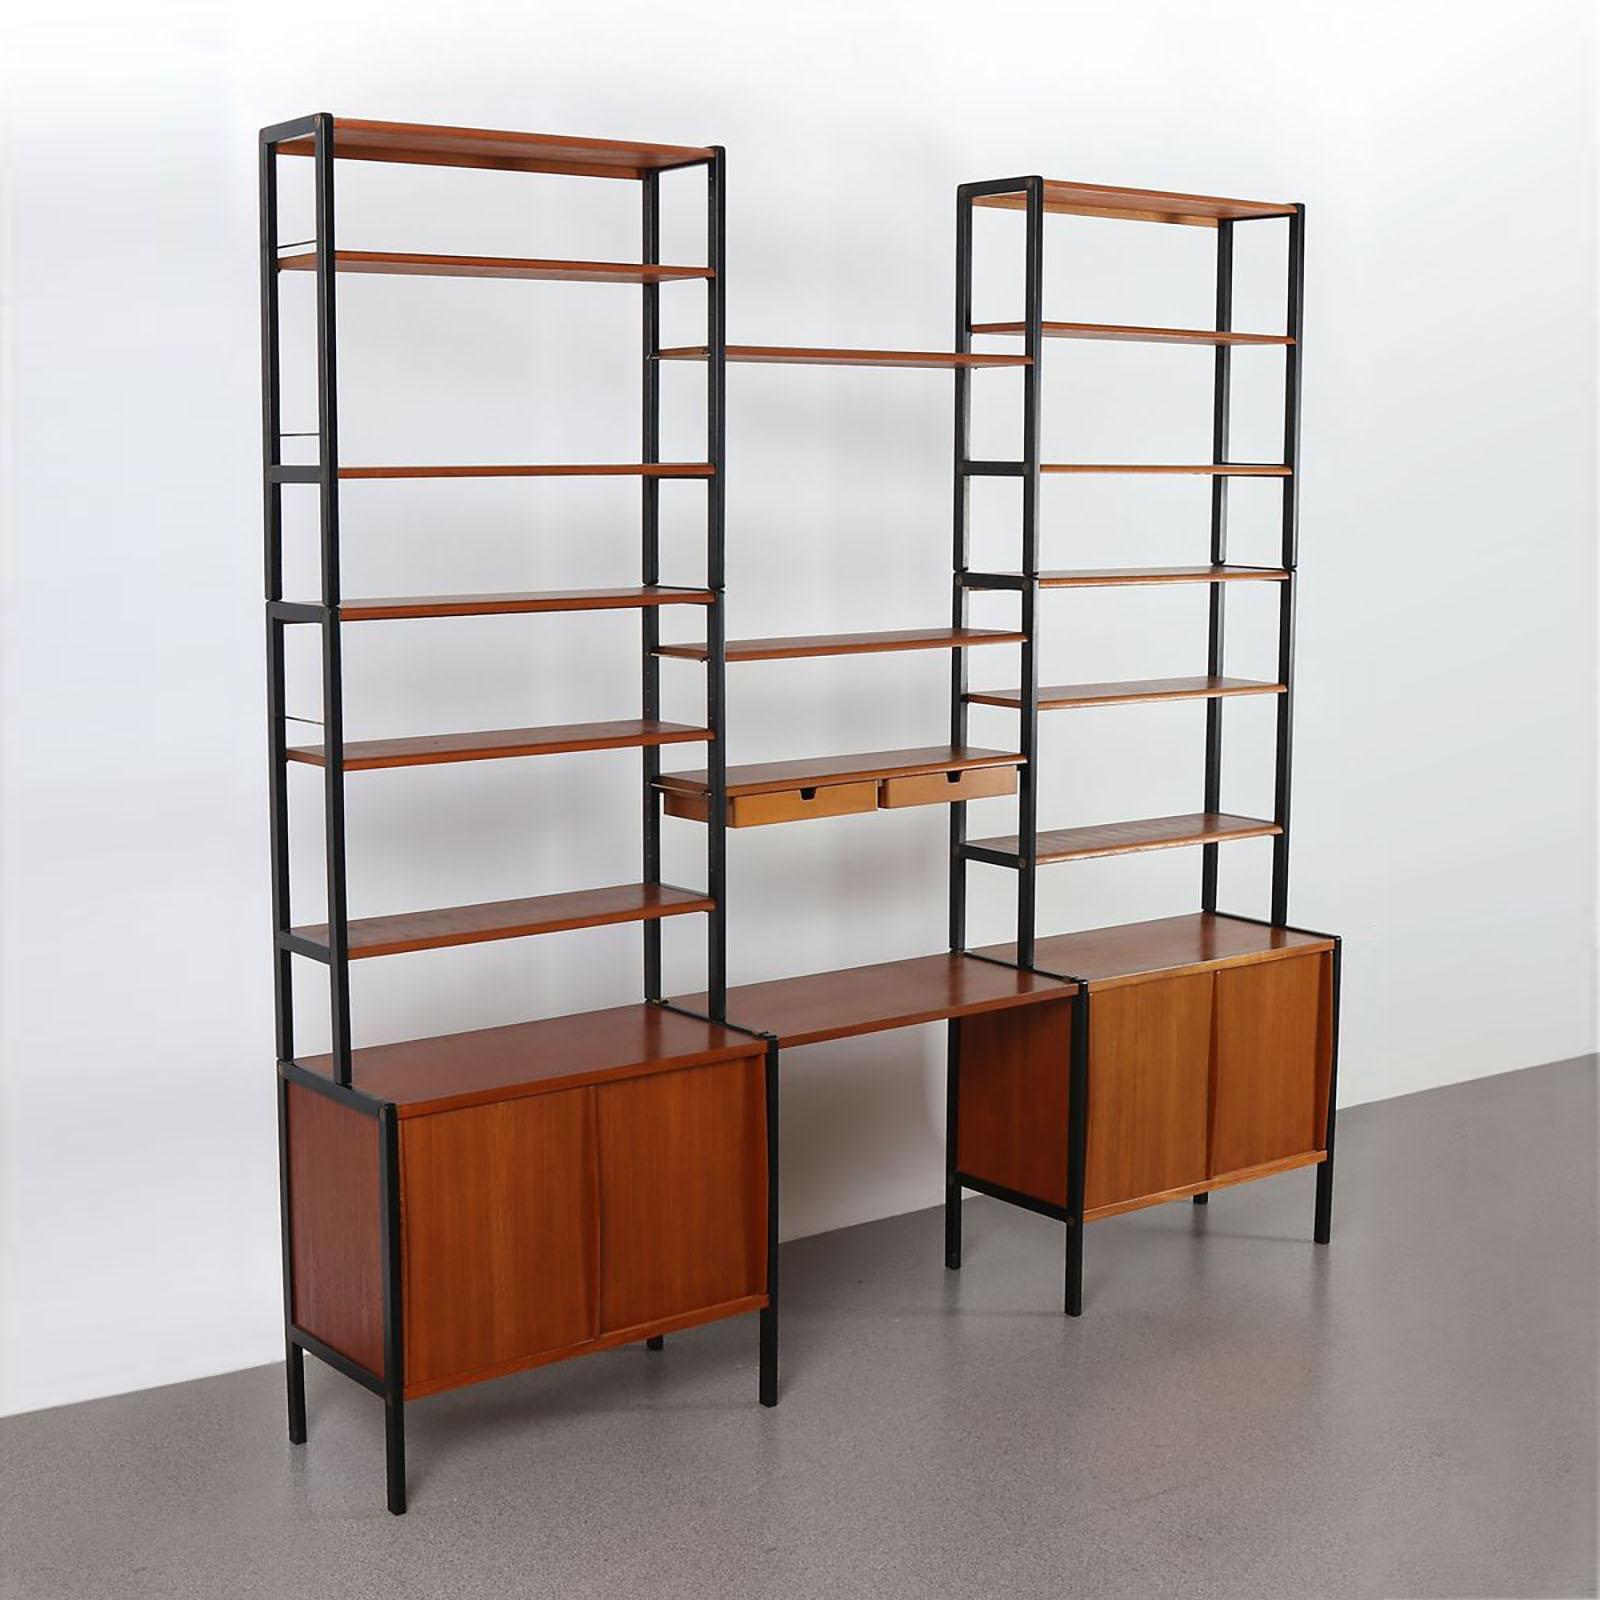 Wall unit in Teak / Bookcase with desk by Bertil Fridhagen for Bodafors, Vintage modular shelving system 1960s
The lower part of the cabinet has two sliding doors and inside with one shelf.
The top part has five shelves and separate adjustable book